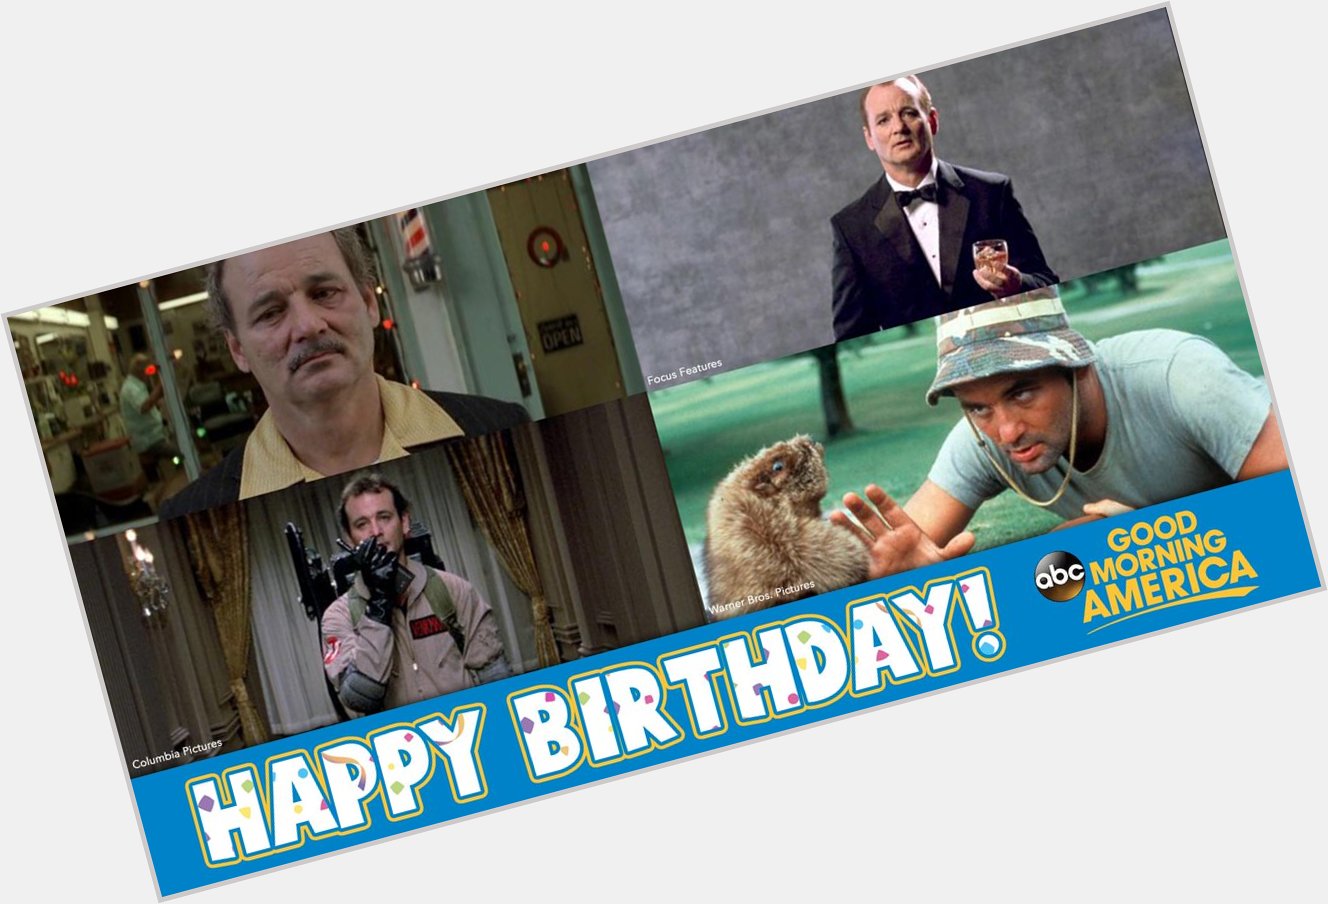 Happy Birthday to an absolute legend in the comedy and acting worlds: Bill Murray! He turns 65 today.  